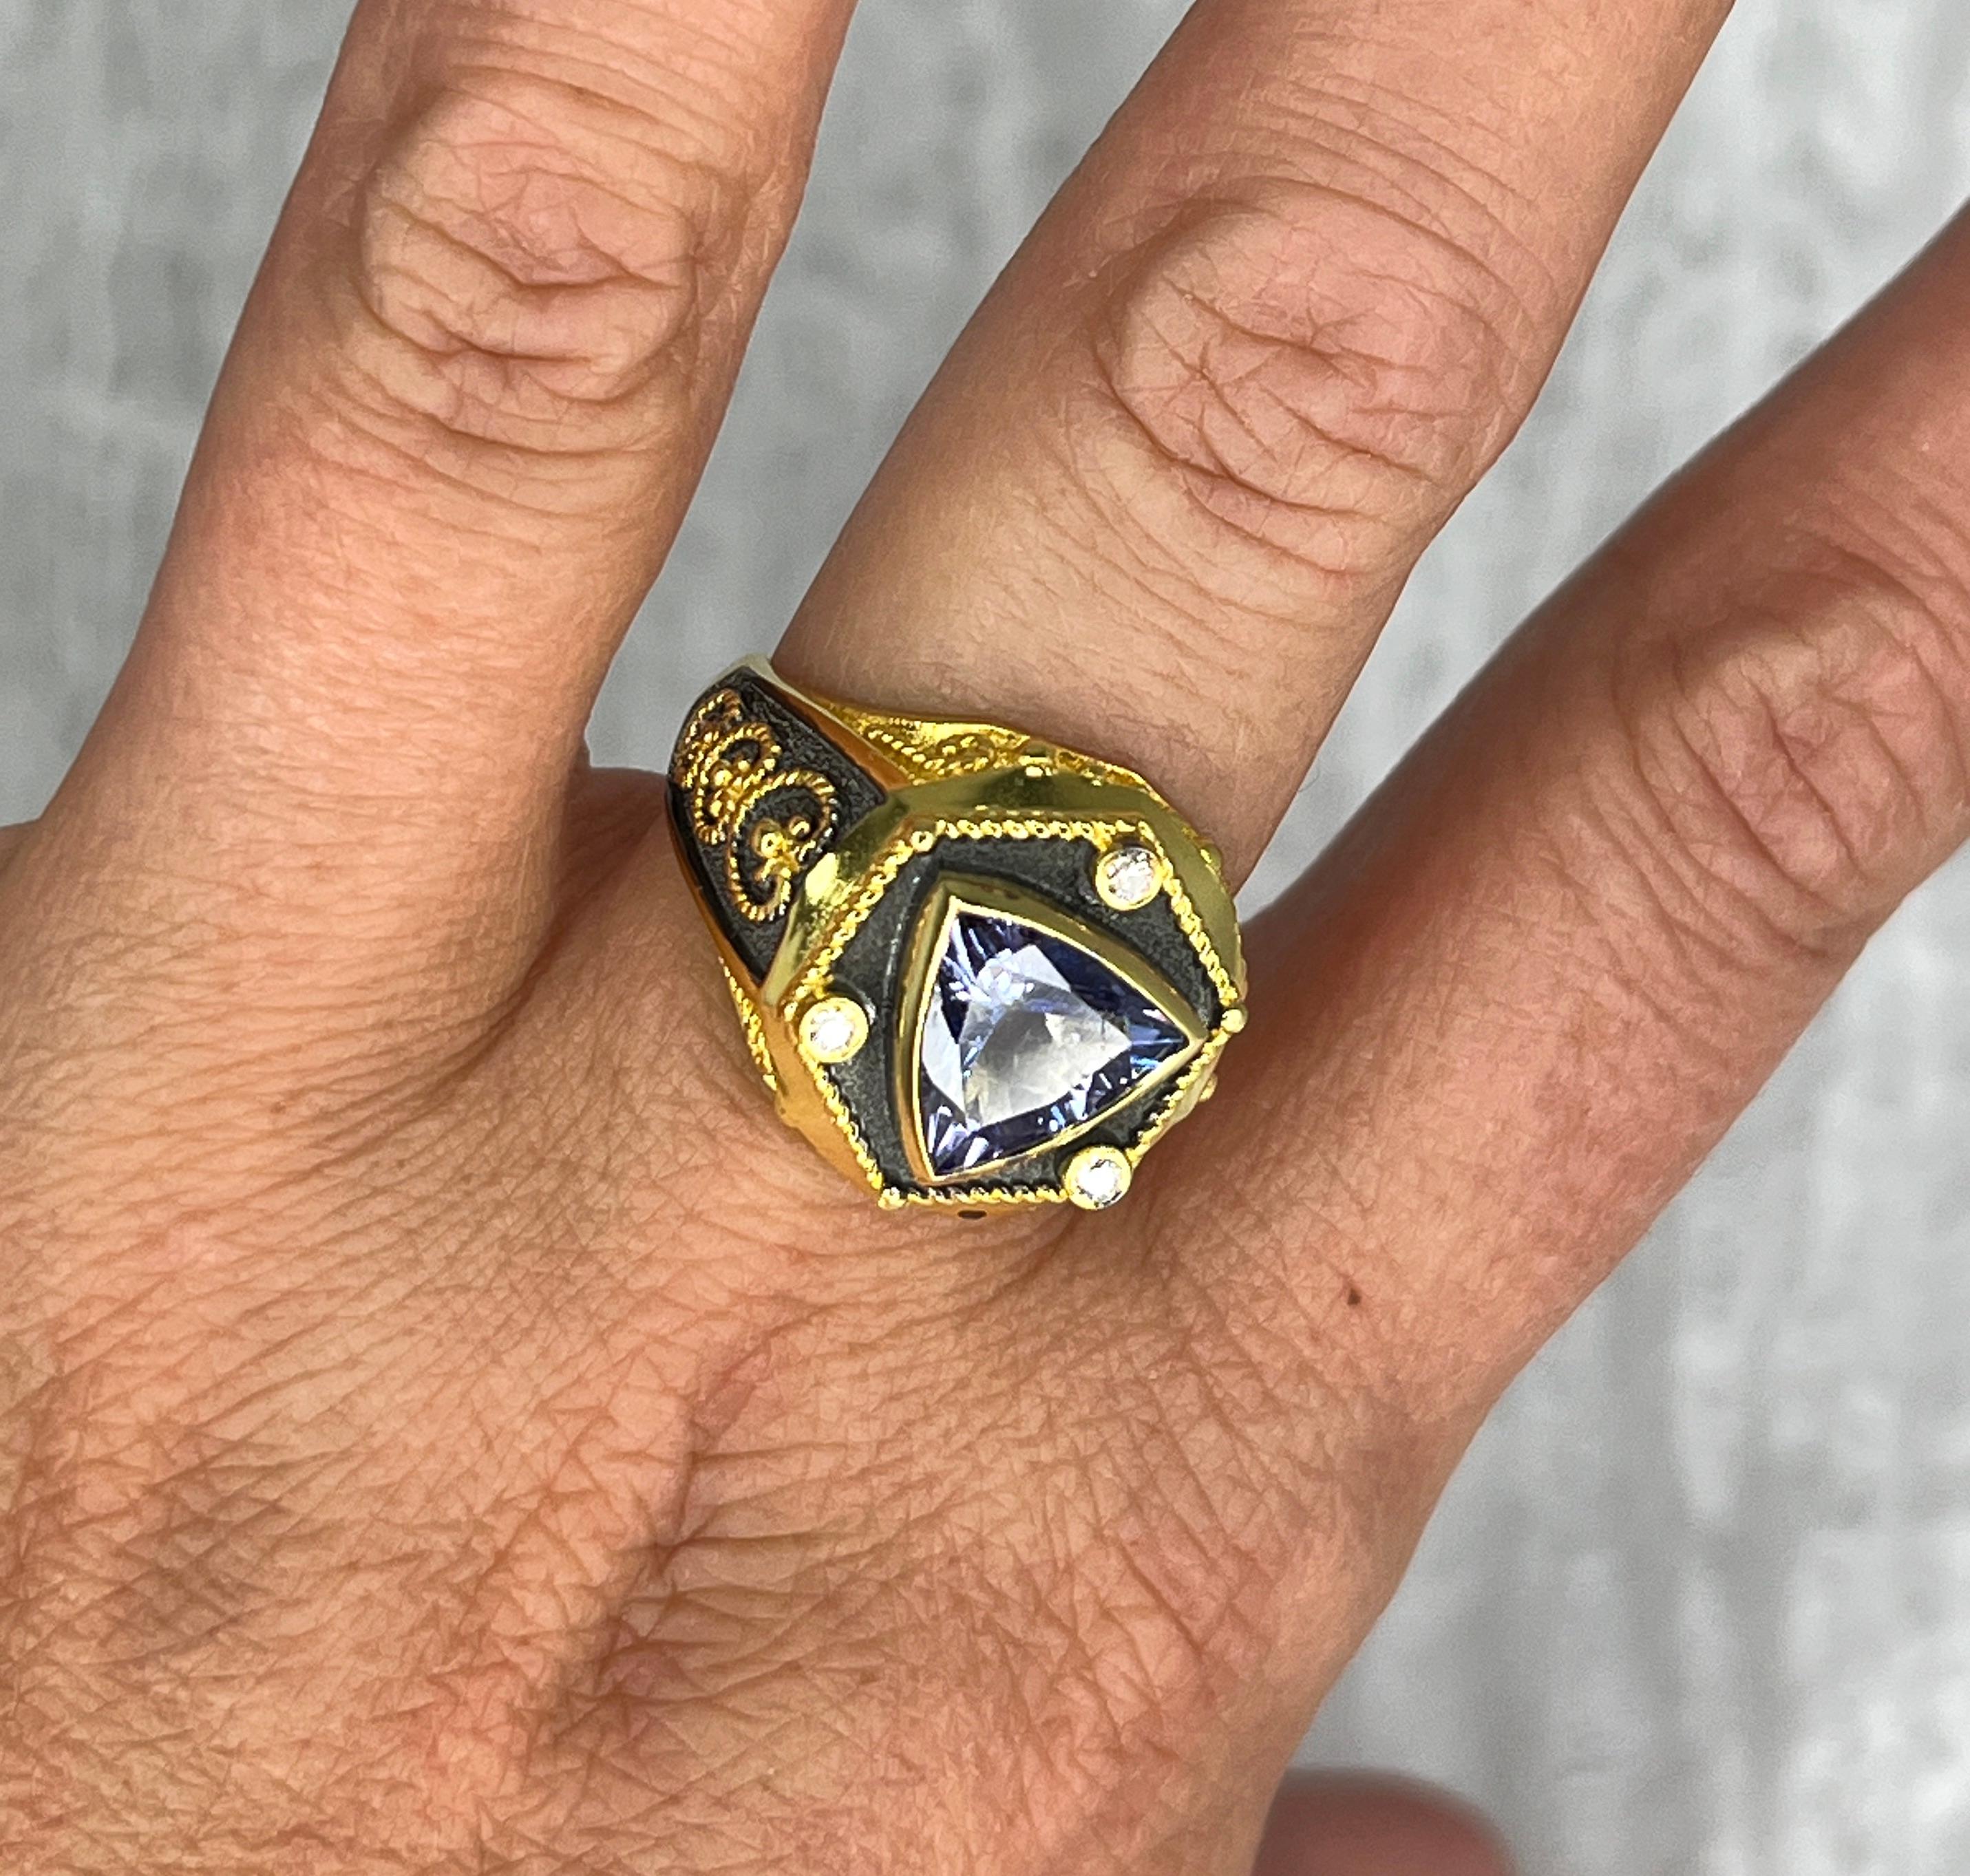 This unique men's and women's S.Georgios designer ring is hand-made from 18 Karat yellow gold in combination with Black Rhodium. It is decorated in a Byzantine style with granulation and twisted wires on a velvet finished background. The ring